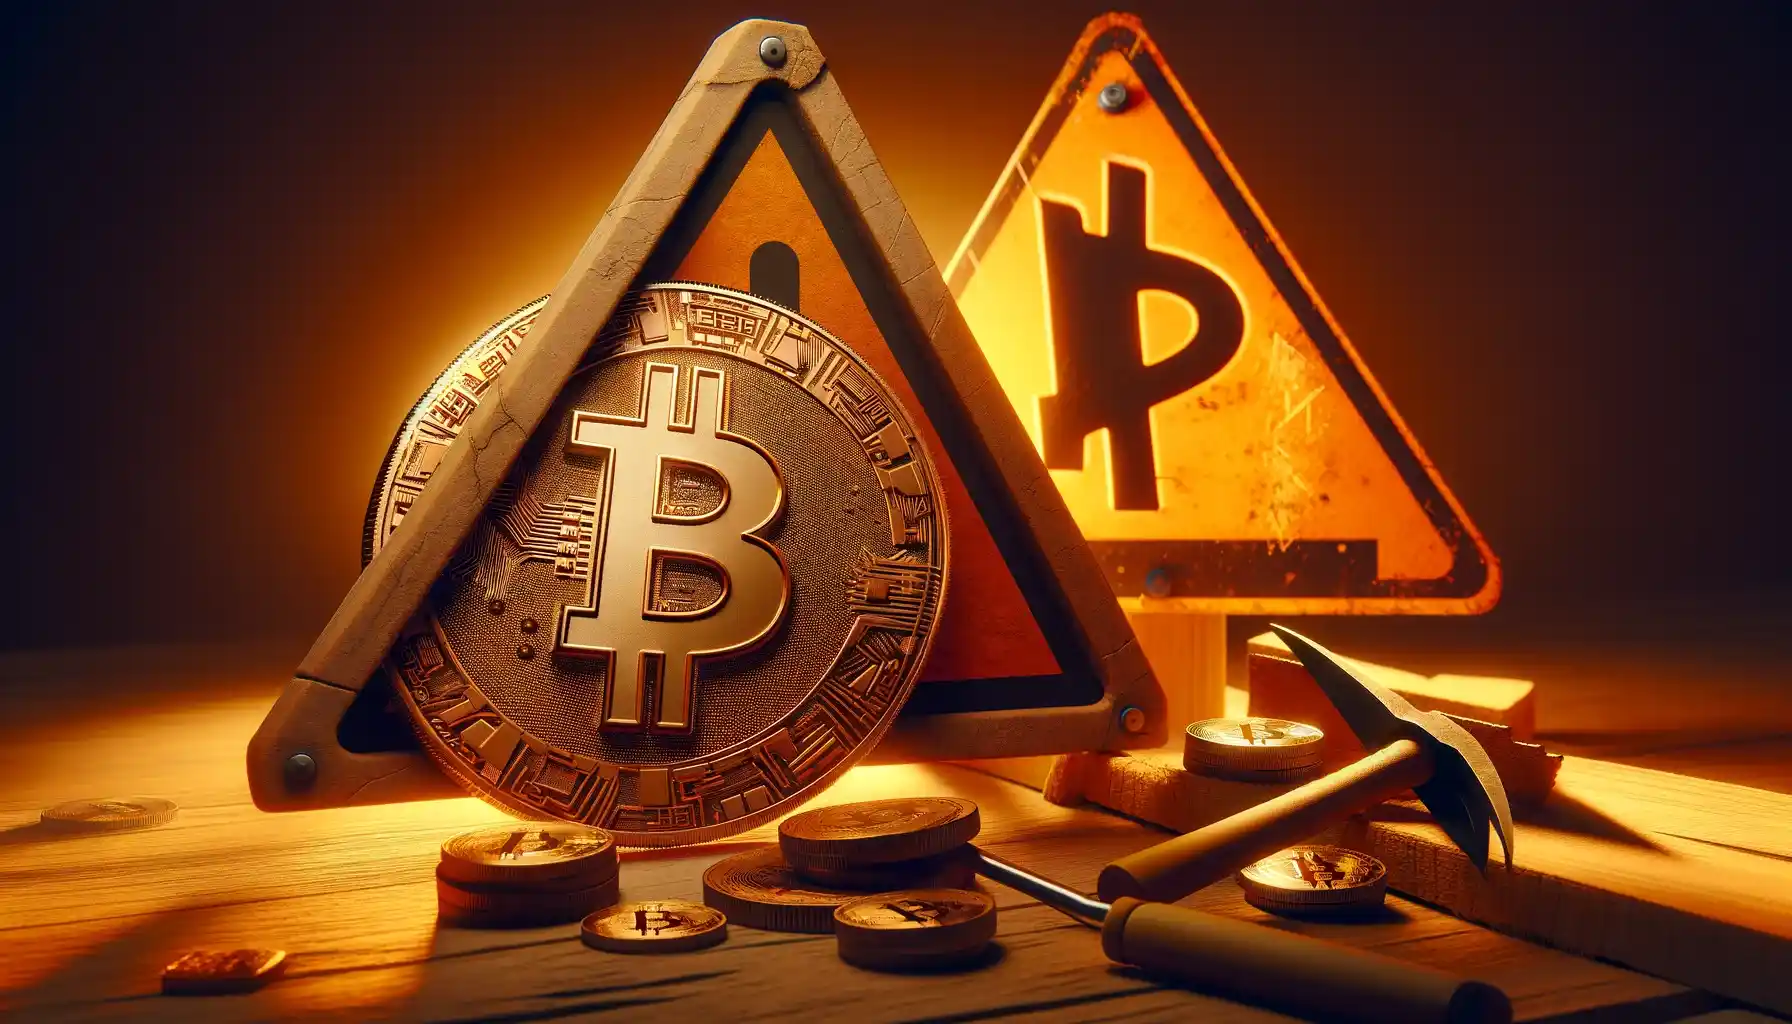 Bitcoin speculative interest rises to dangerous levels and a market reset has begun